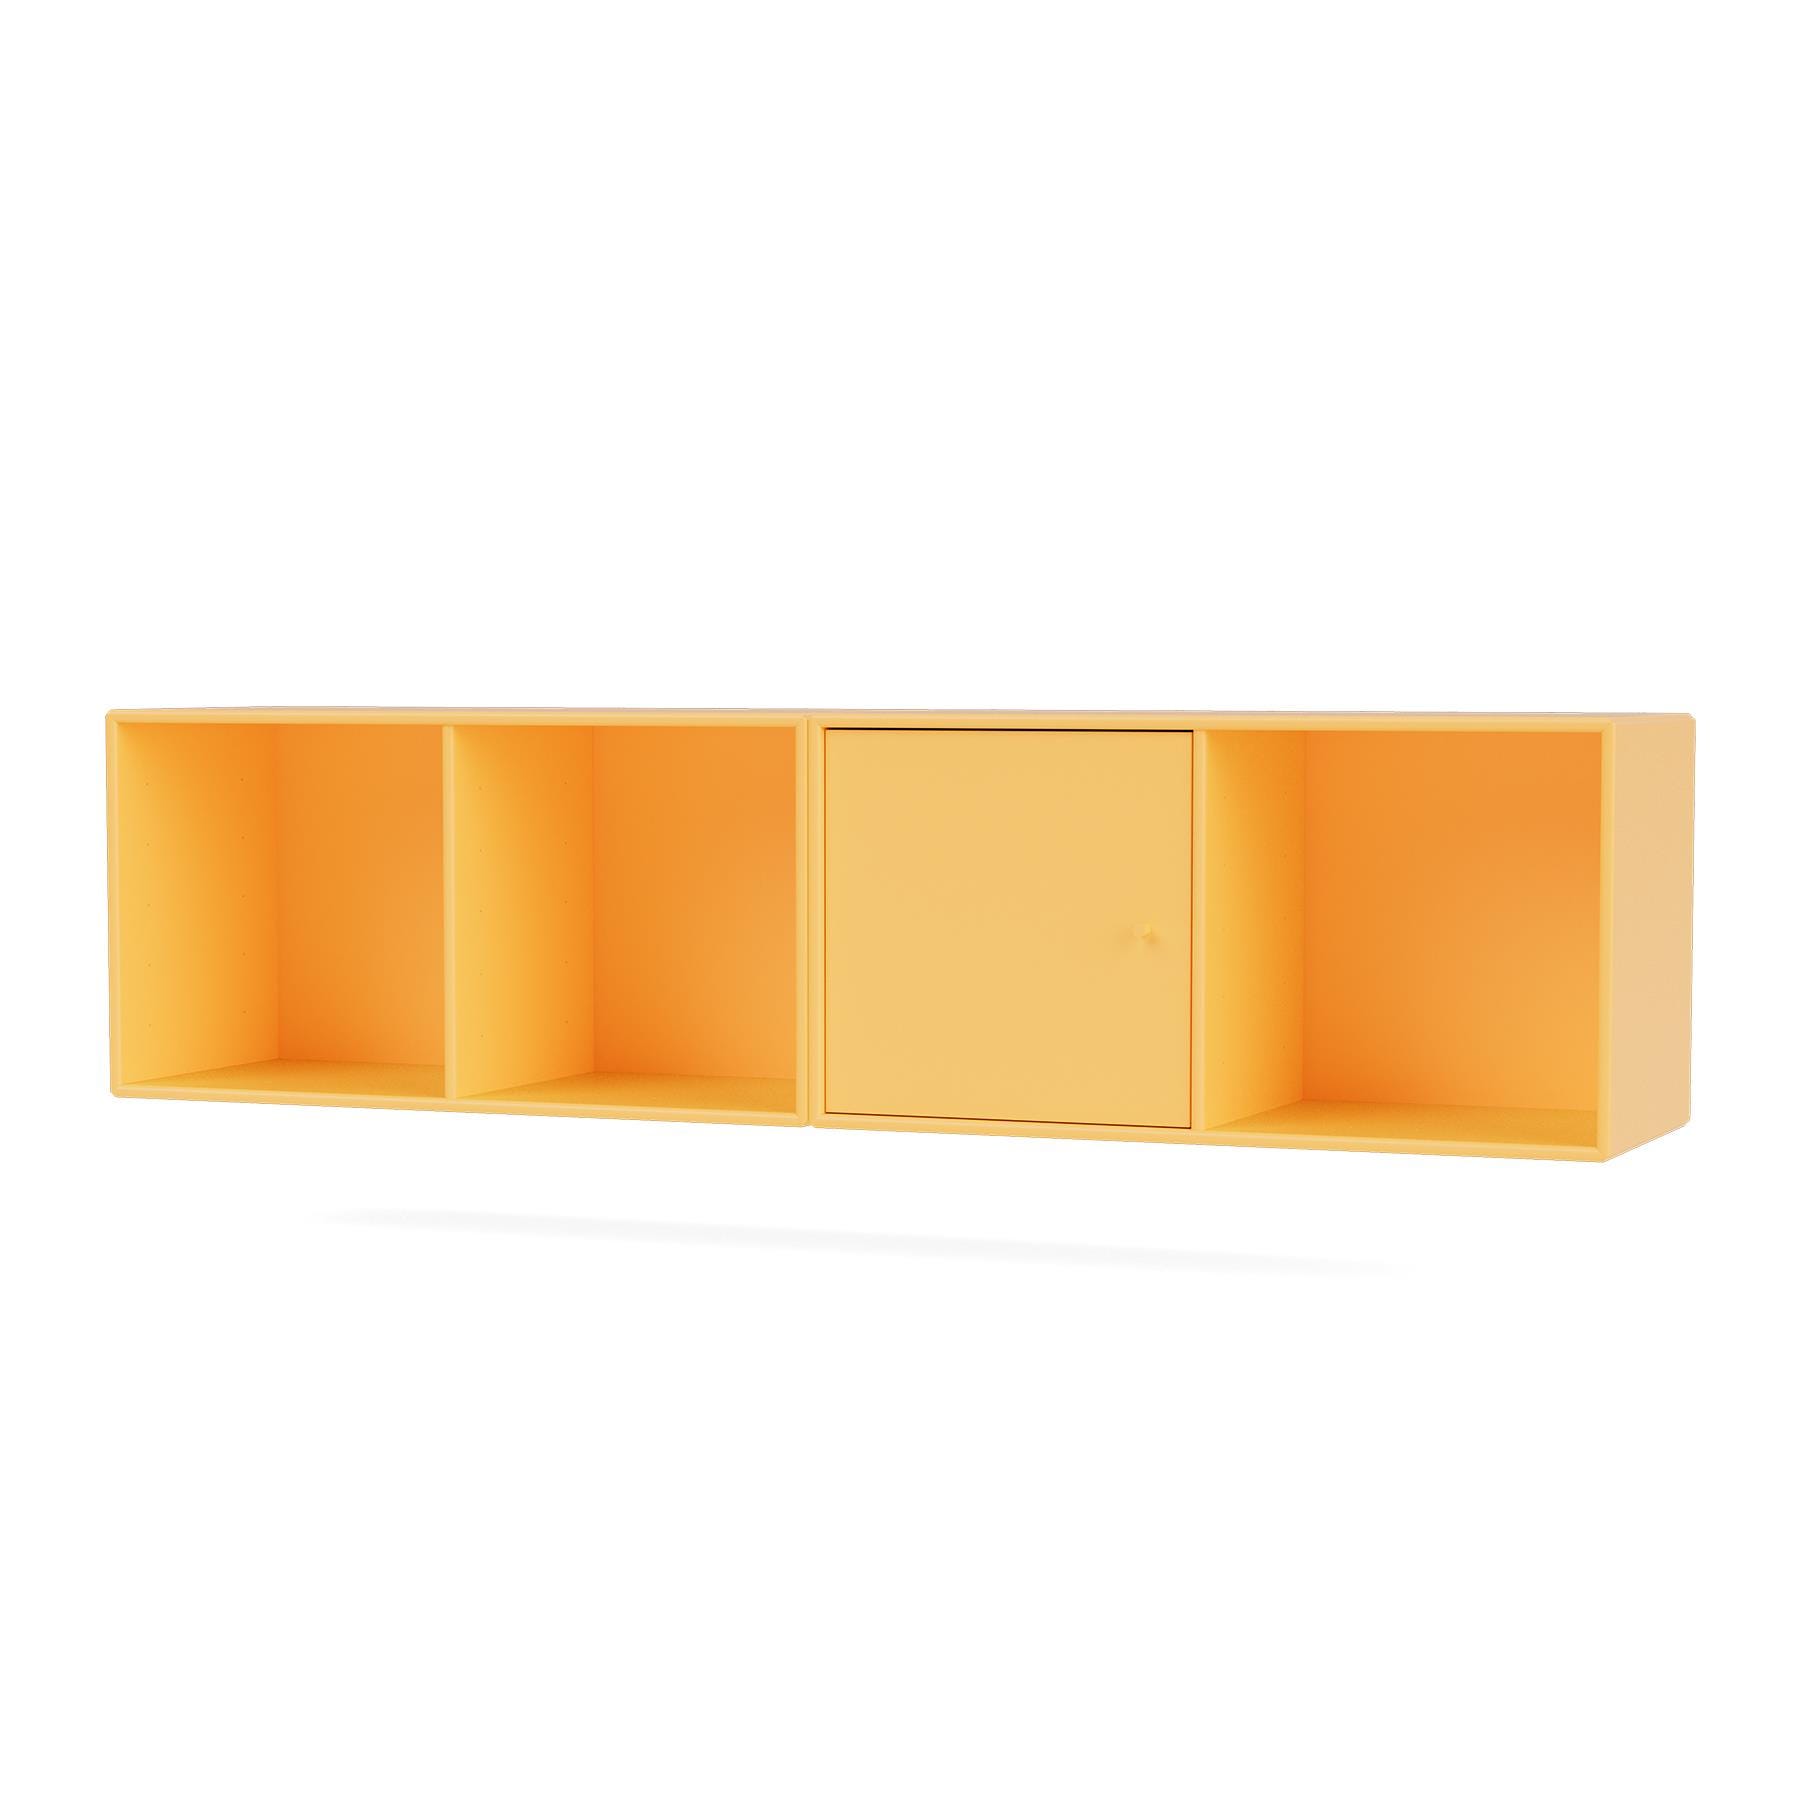 Montana Line Sideboard Acacia Wall Mounted Yellow Designer Furniture From Holloways Of Ludlow